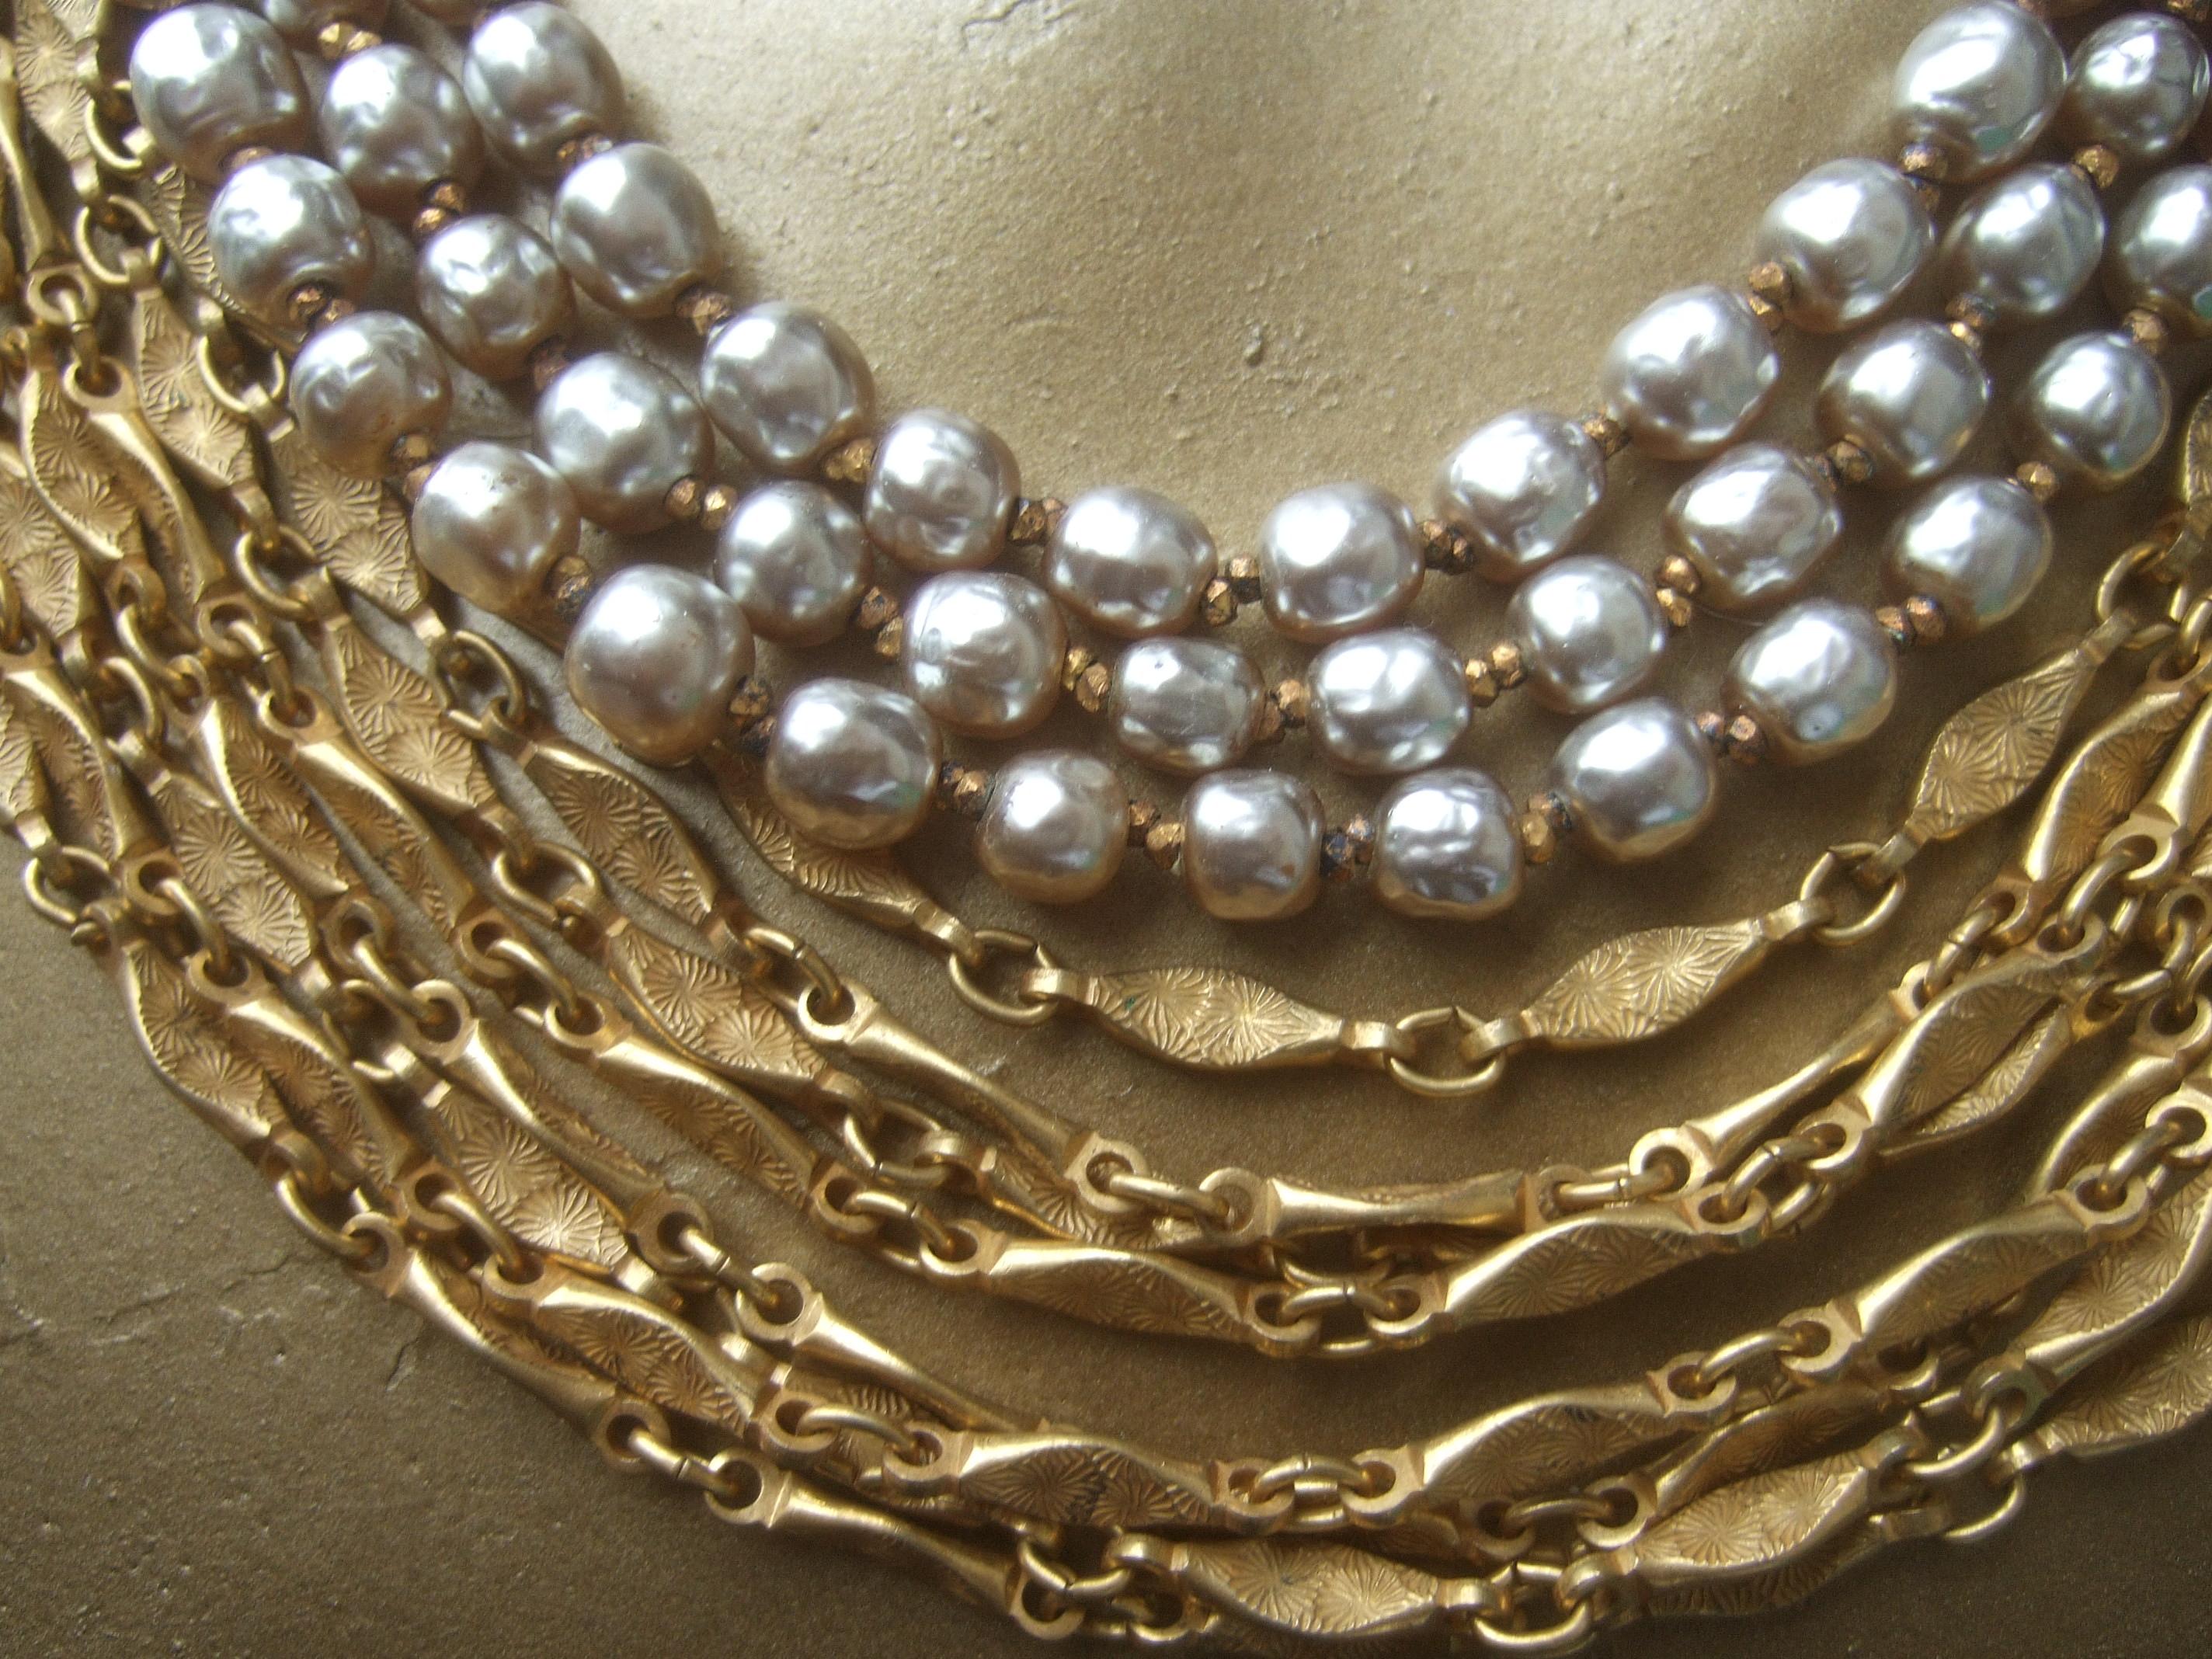 Women's Miriam Haskell Glass Baroque Pearls & Chains Choker Necklace & Earrings  c 1960s